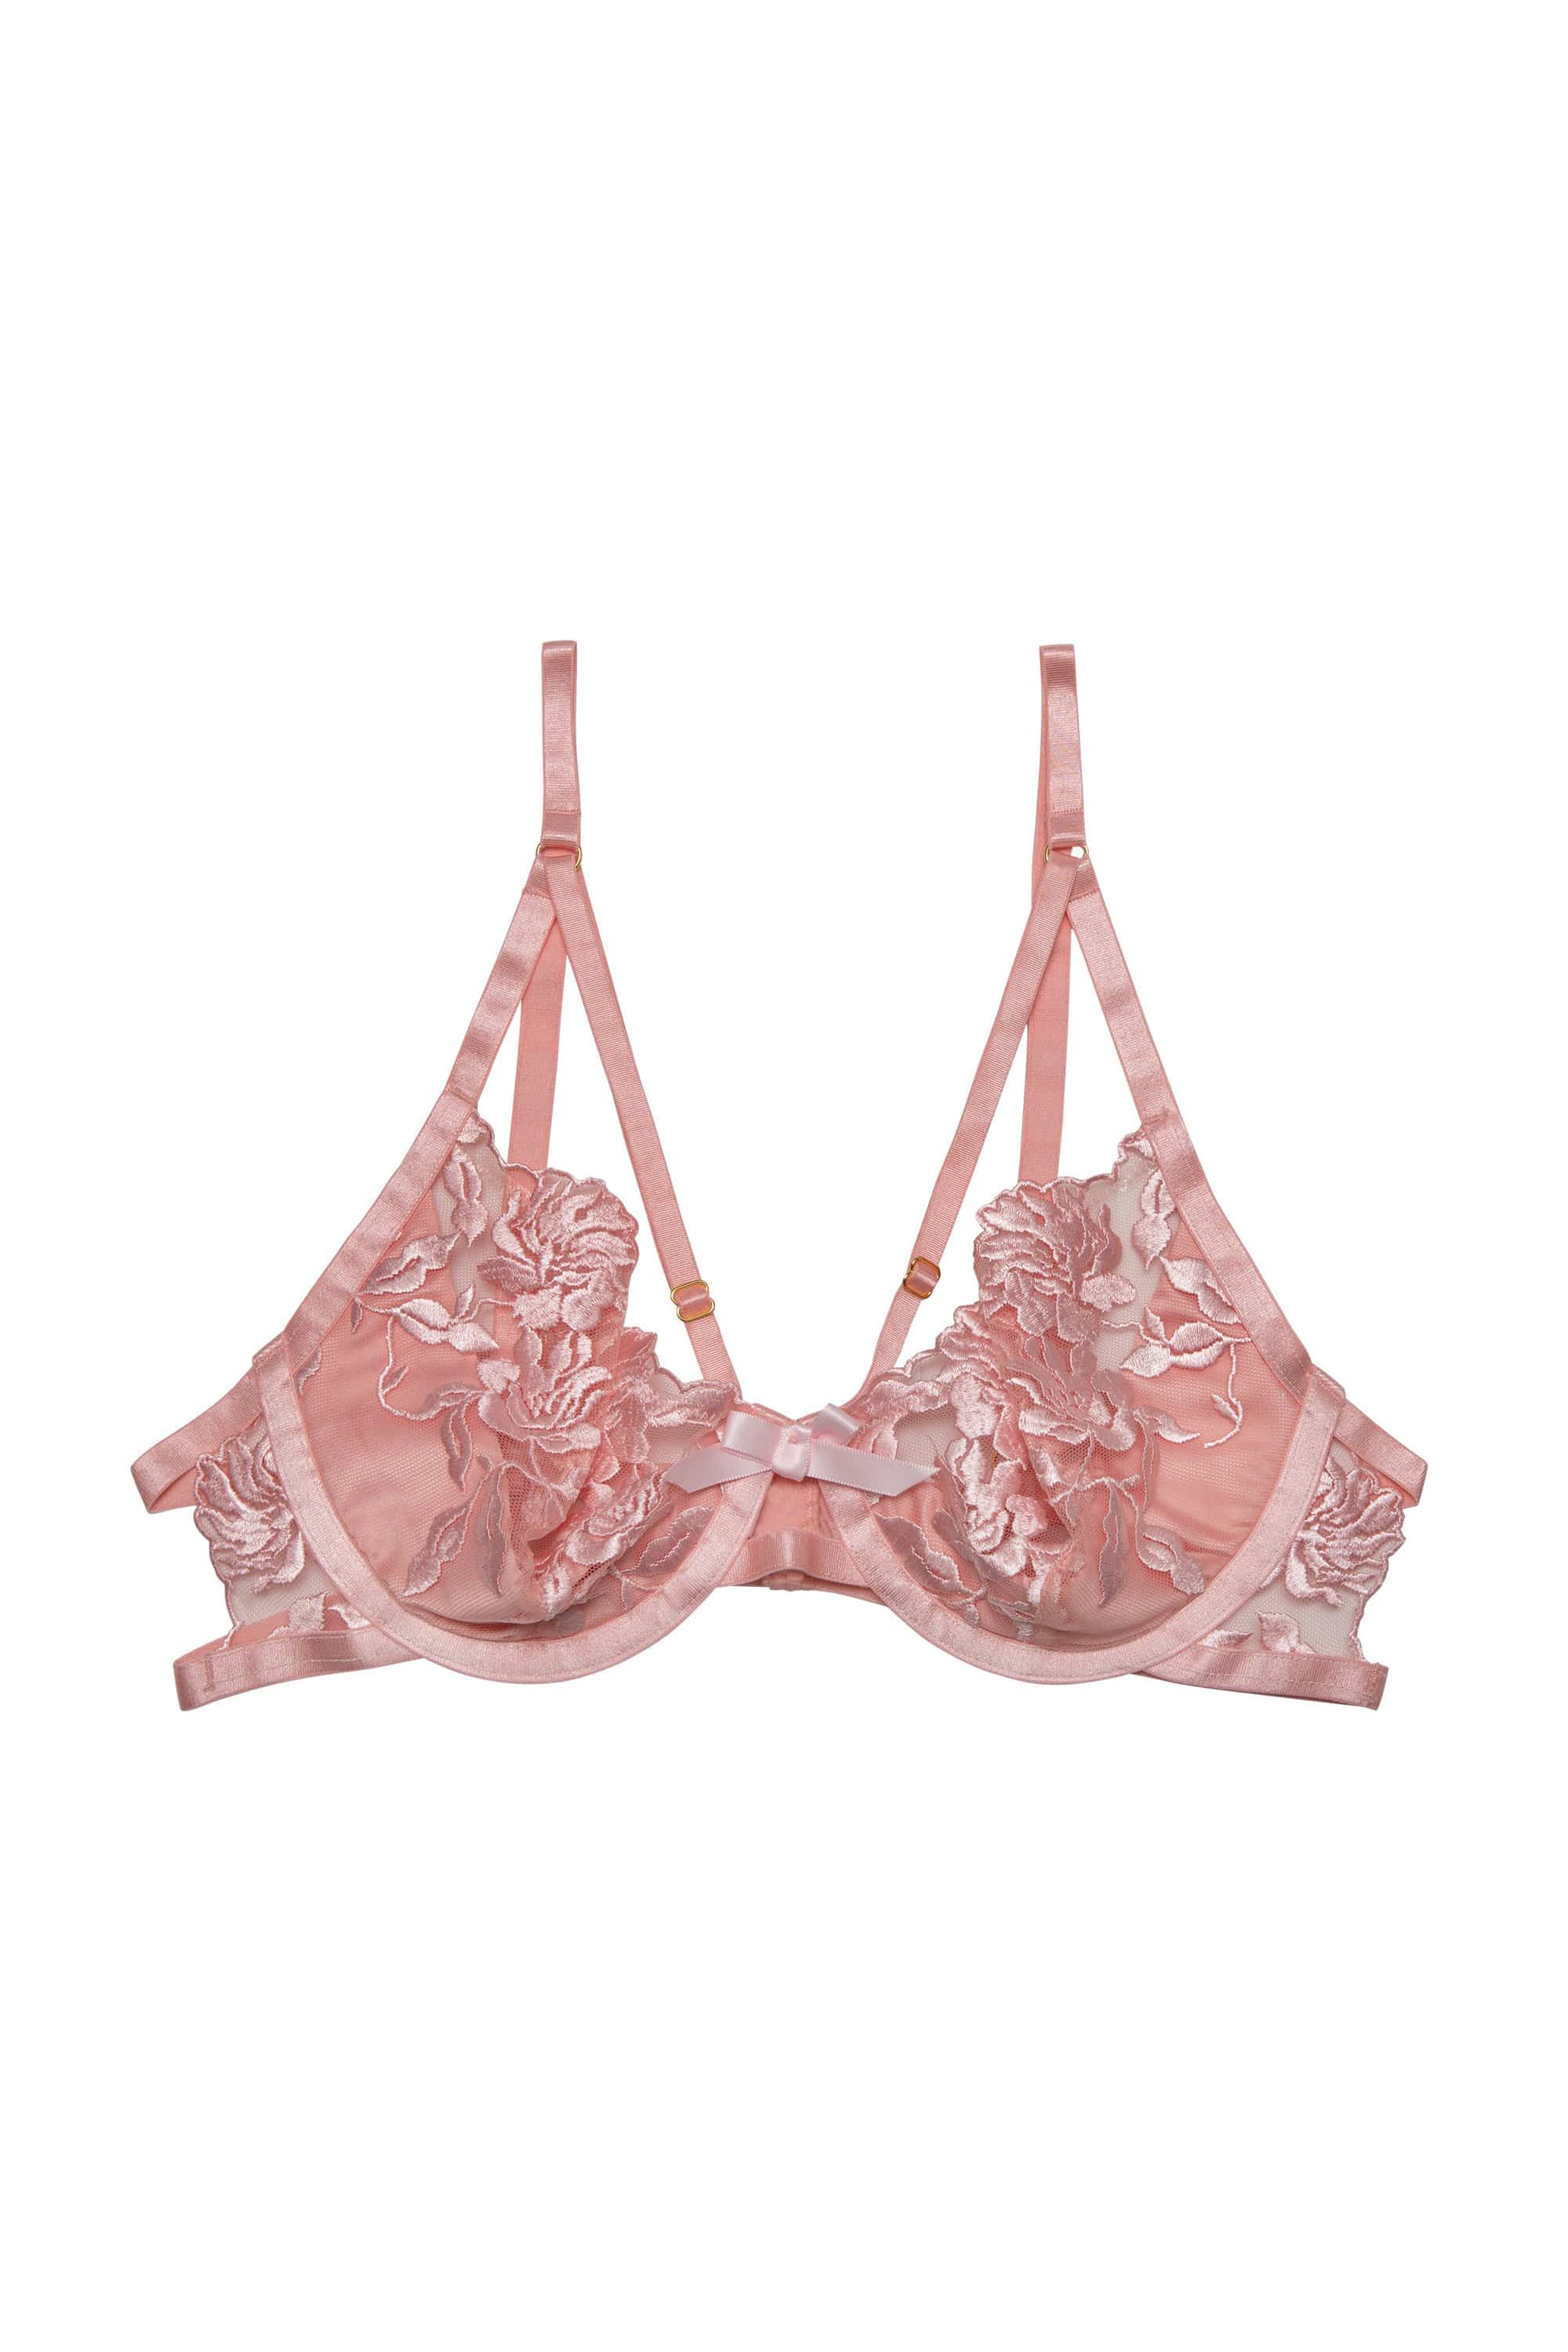 Embroidered Cat Pink Mesh Triangle Bra